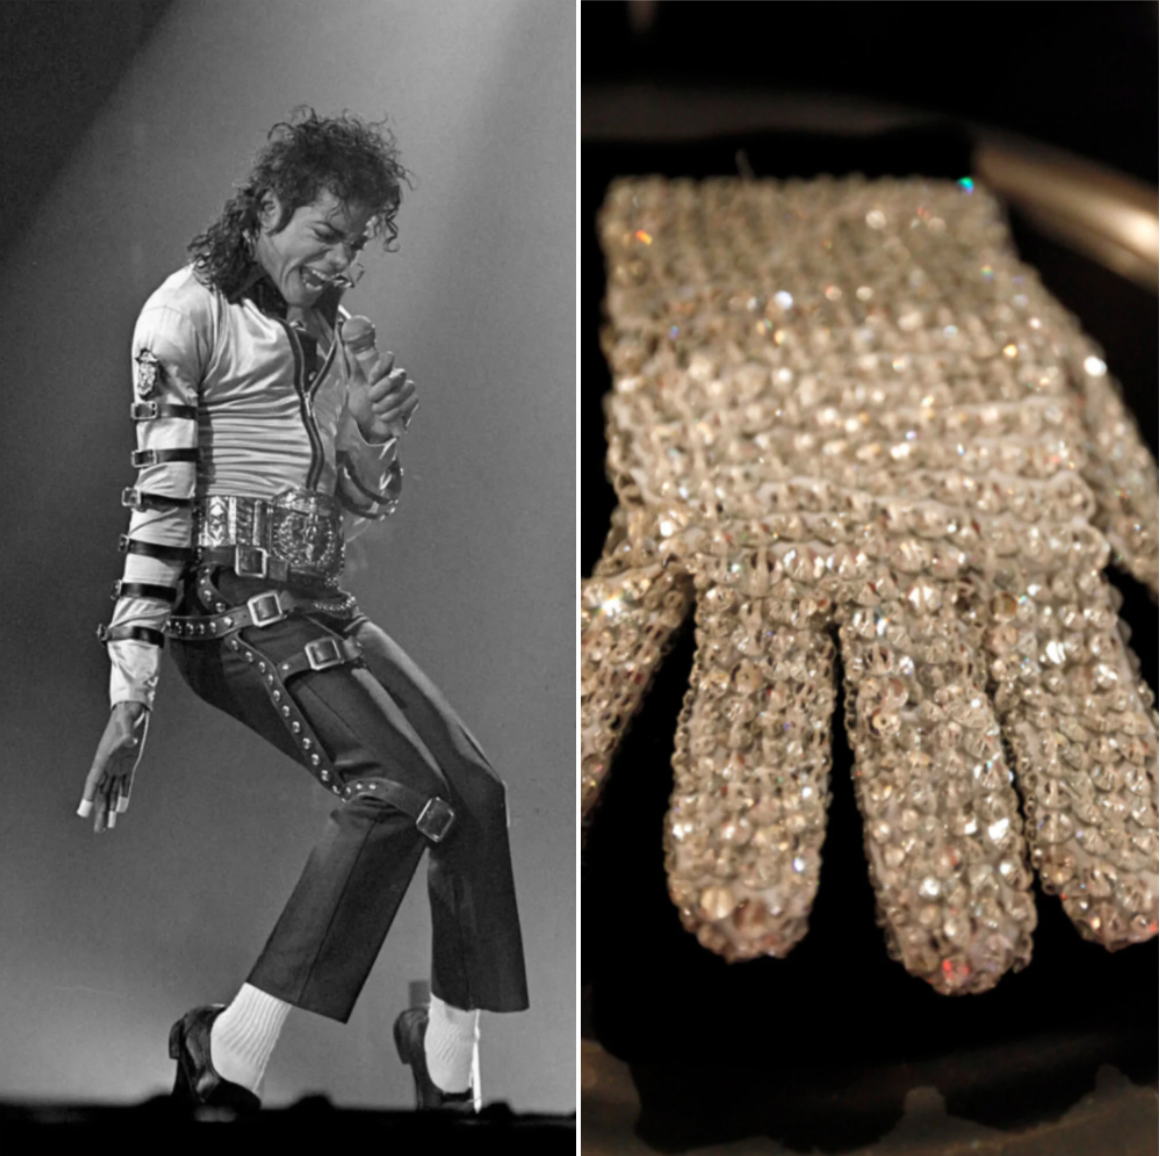 Gaga acquired the iconic crystal glove from Michael Jackson's music video.